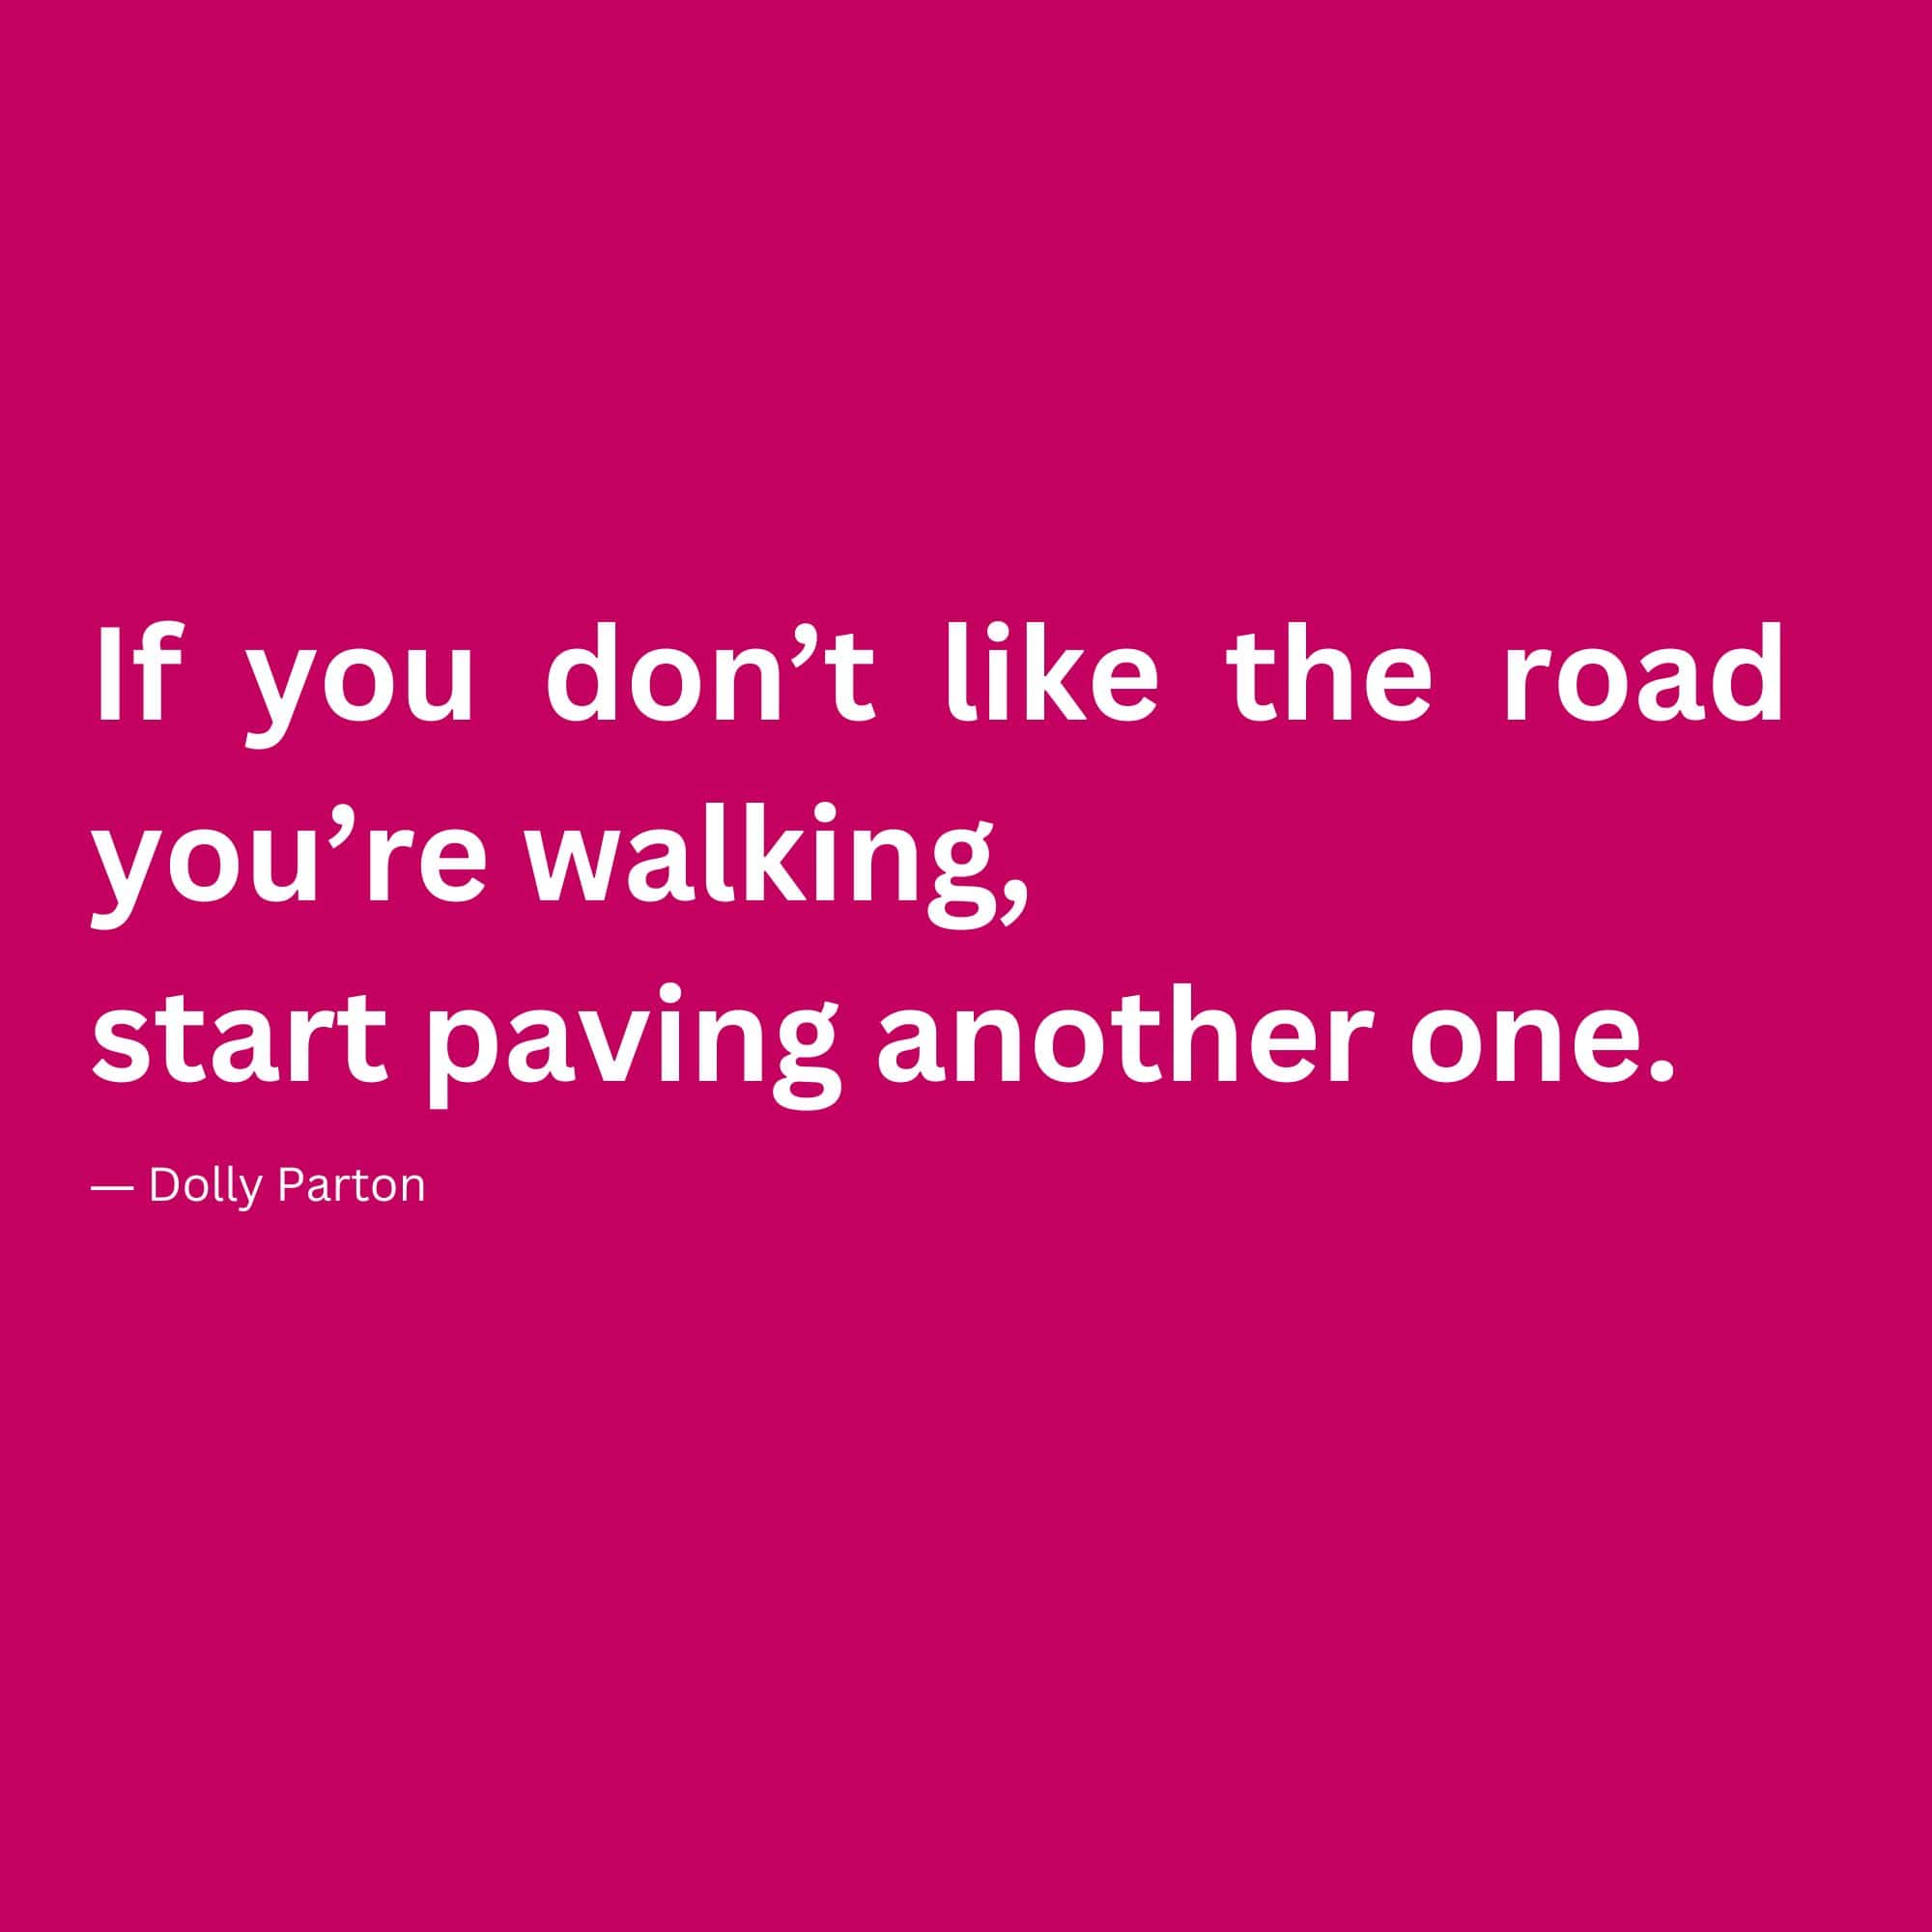 “If you don’t like the road you’re walking, start paving another one.” ― Dolly Parton